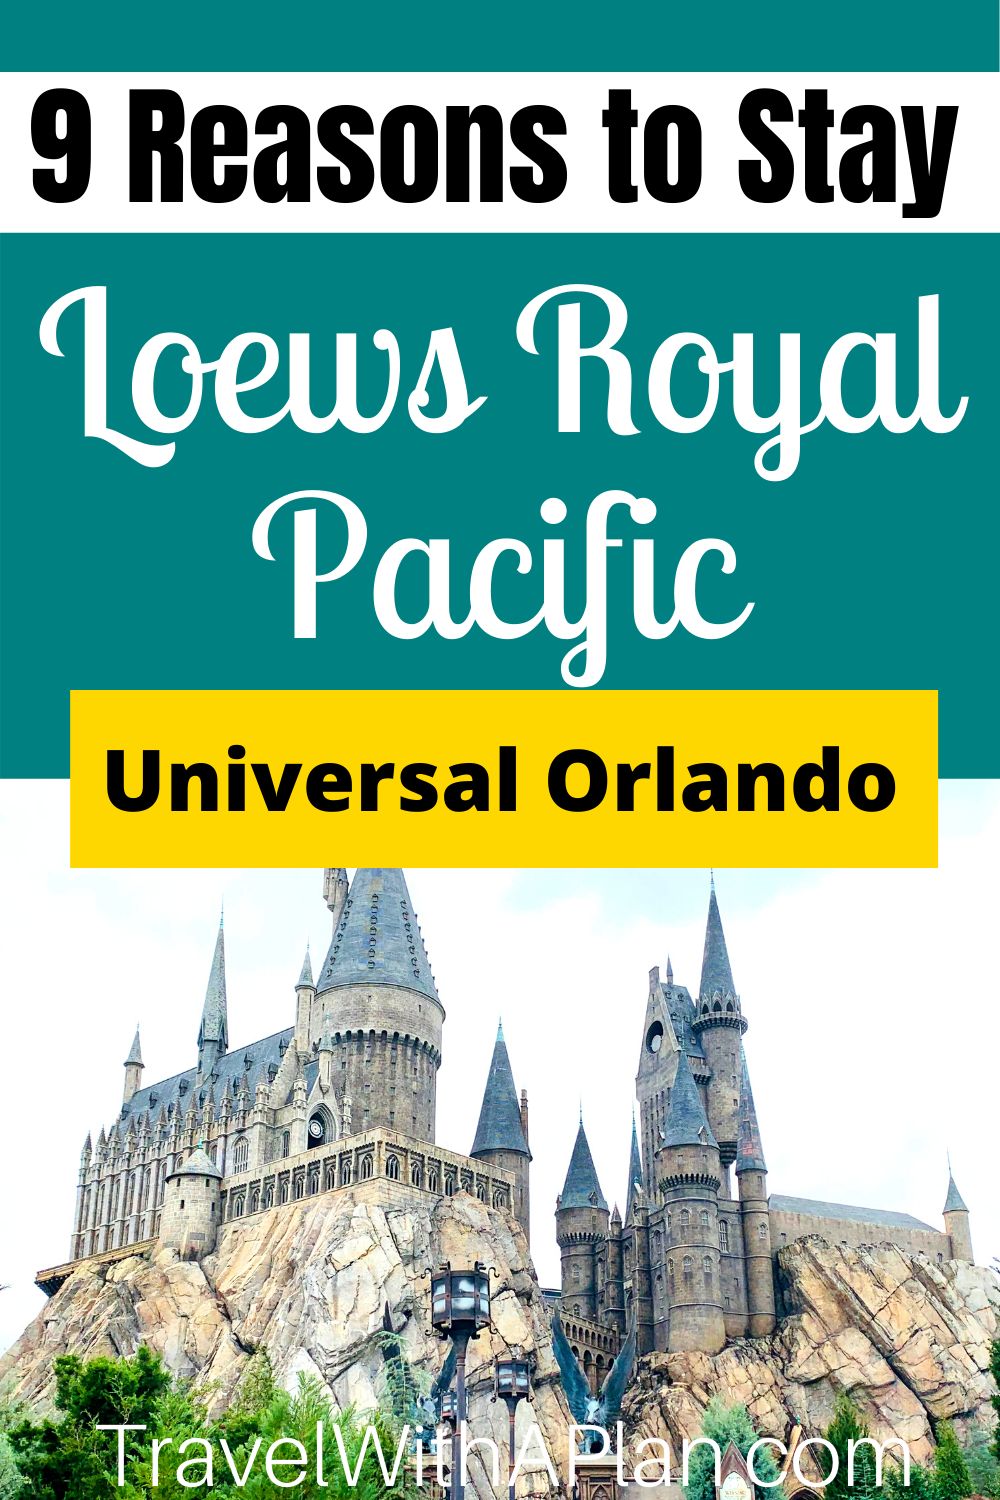 Check out the 9 reasons to stay at Loews Royal Pacific at Universal Orlando from Top U.S. Travel Blog, Travel With A Plan!